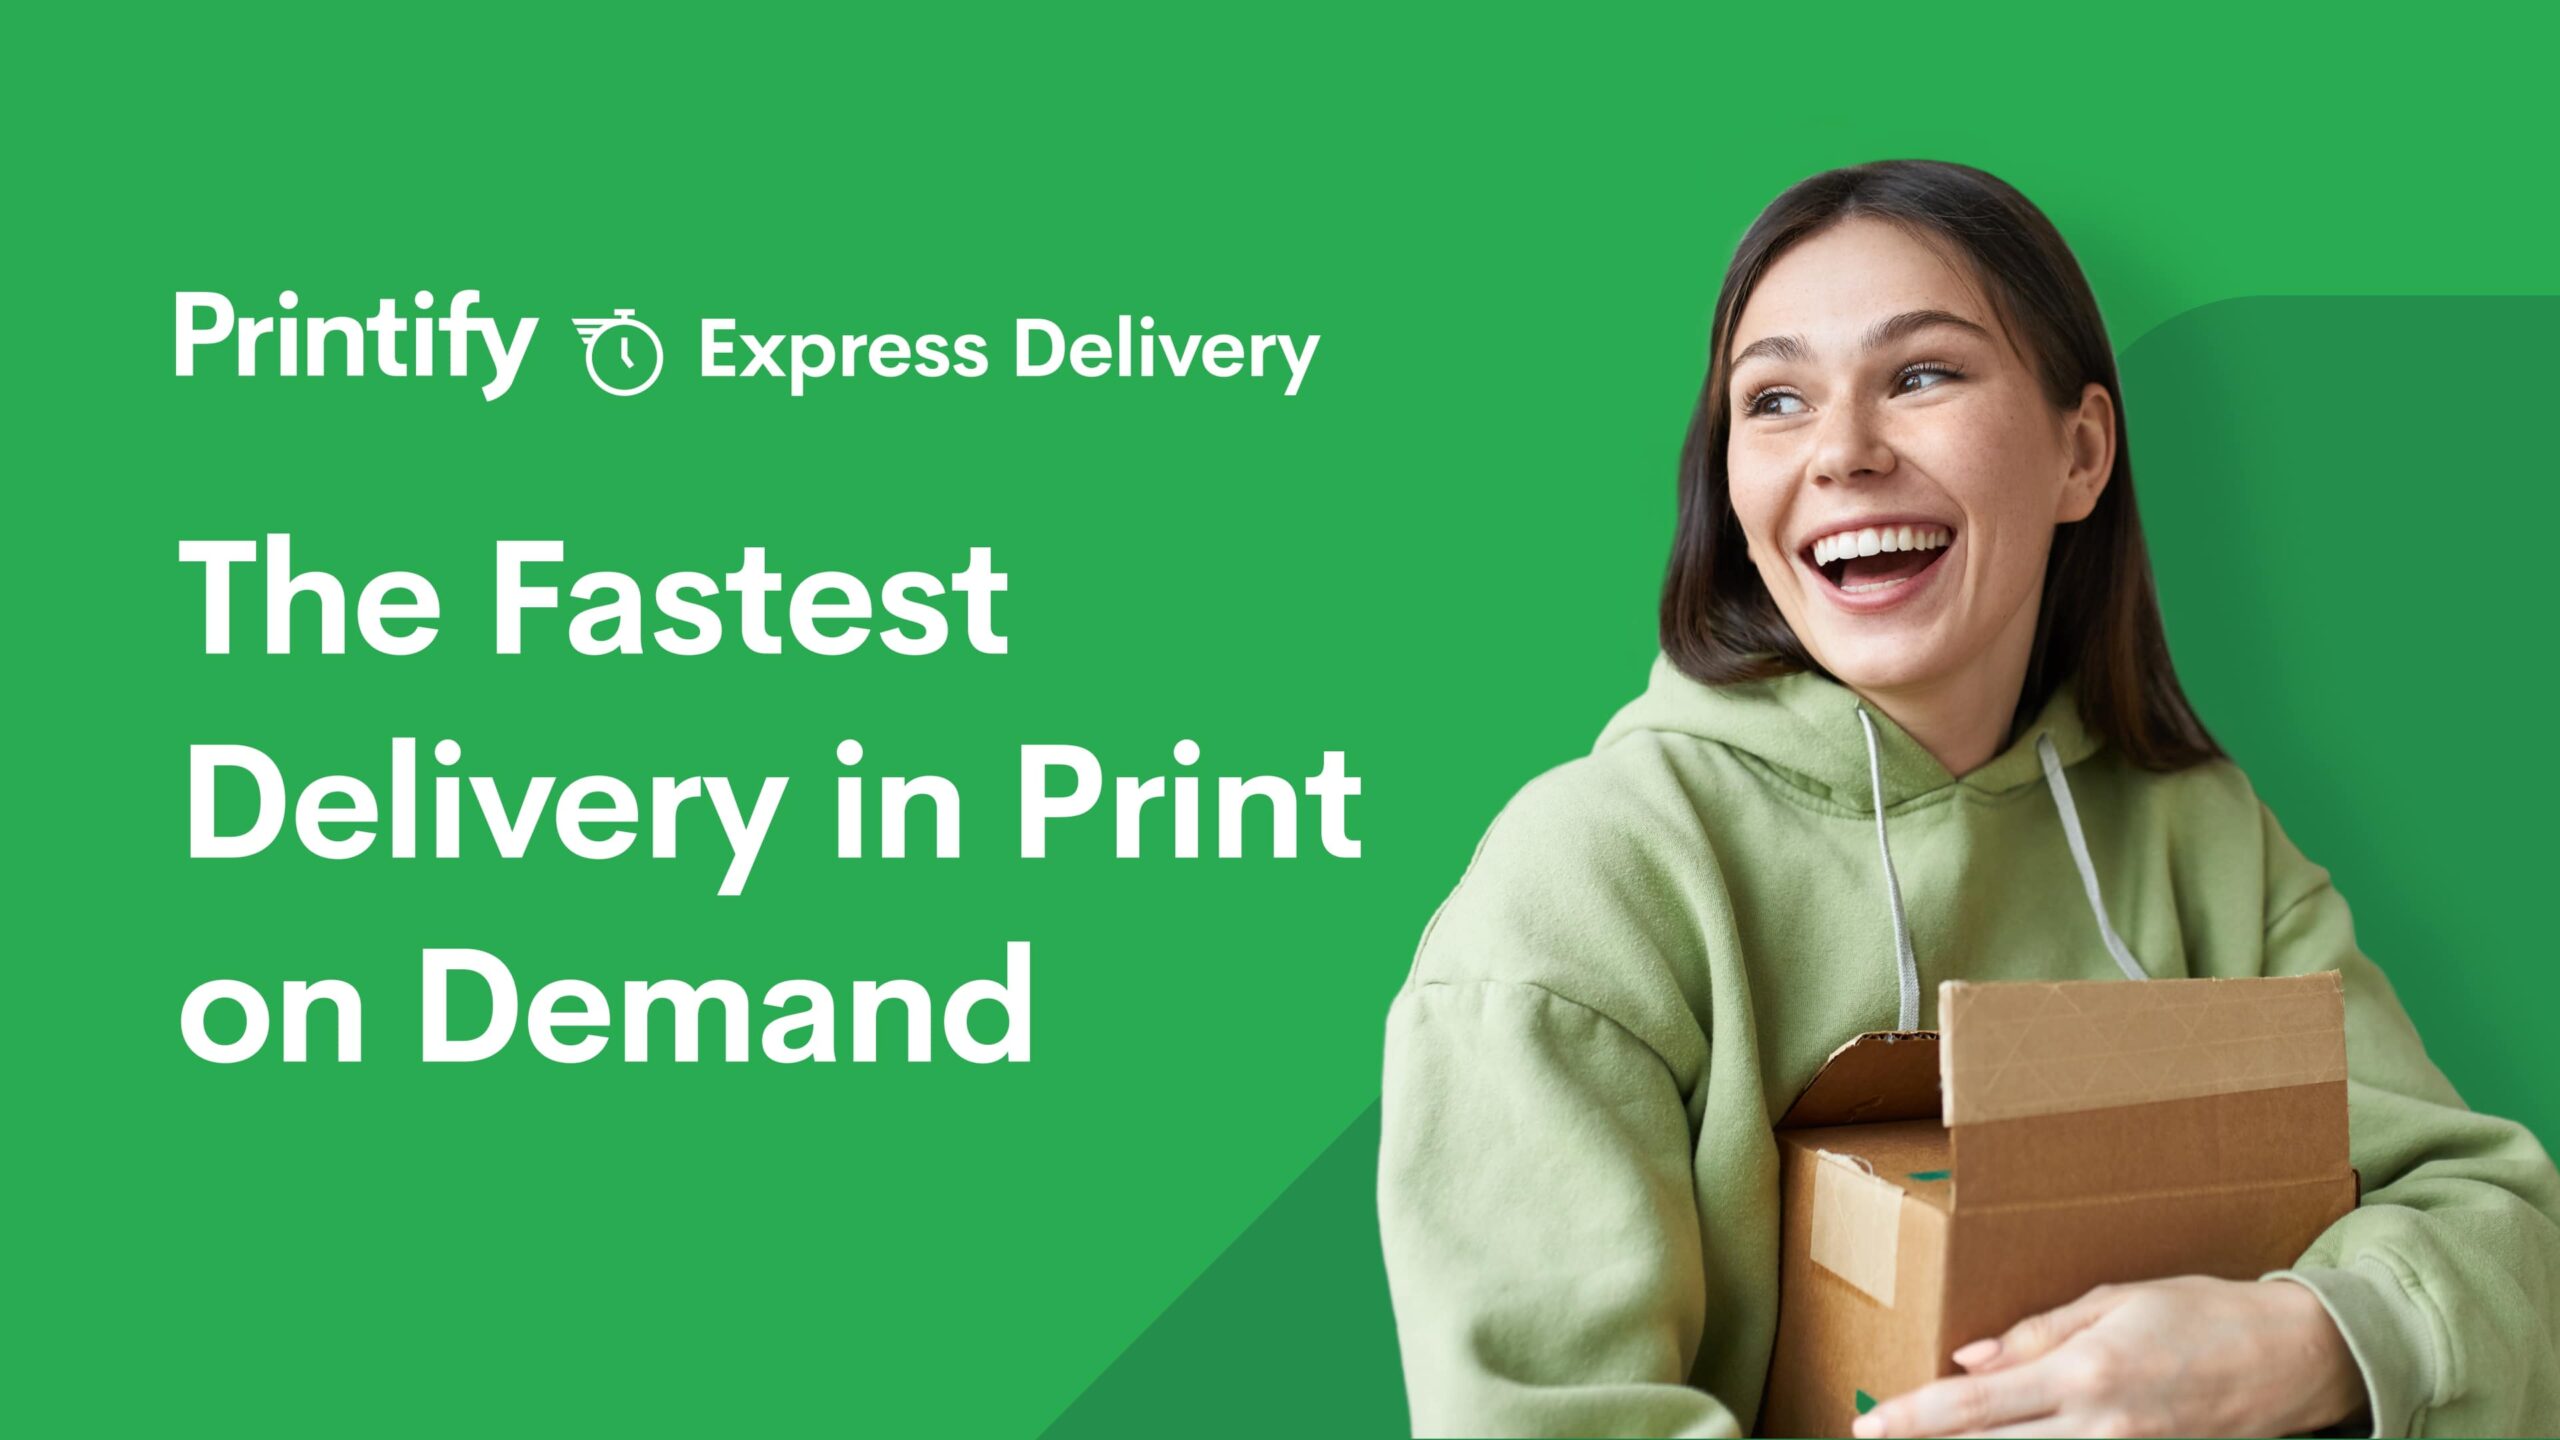 Printify Express Delivery – The Fastest Way to Delight Customers